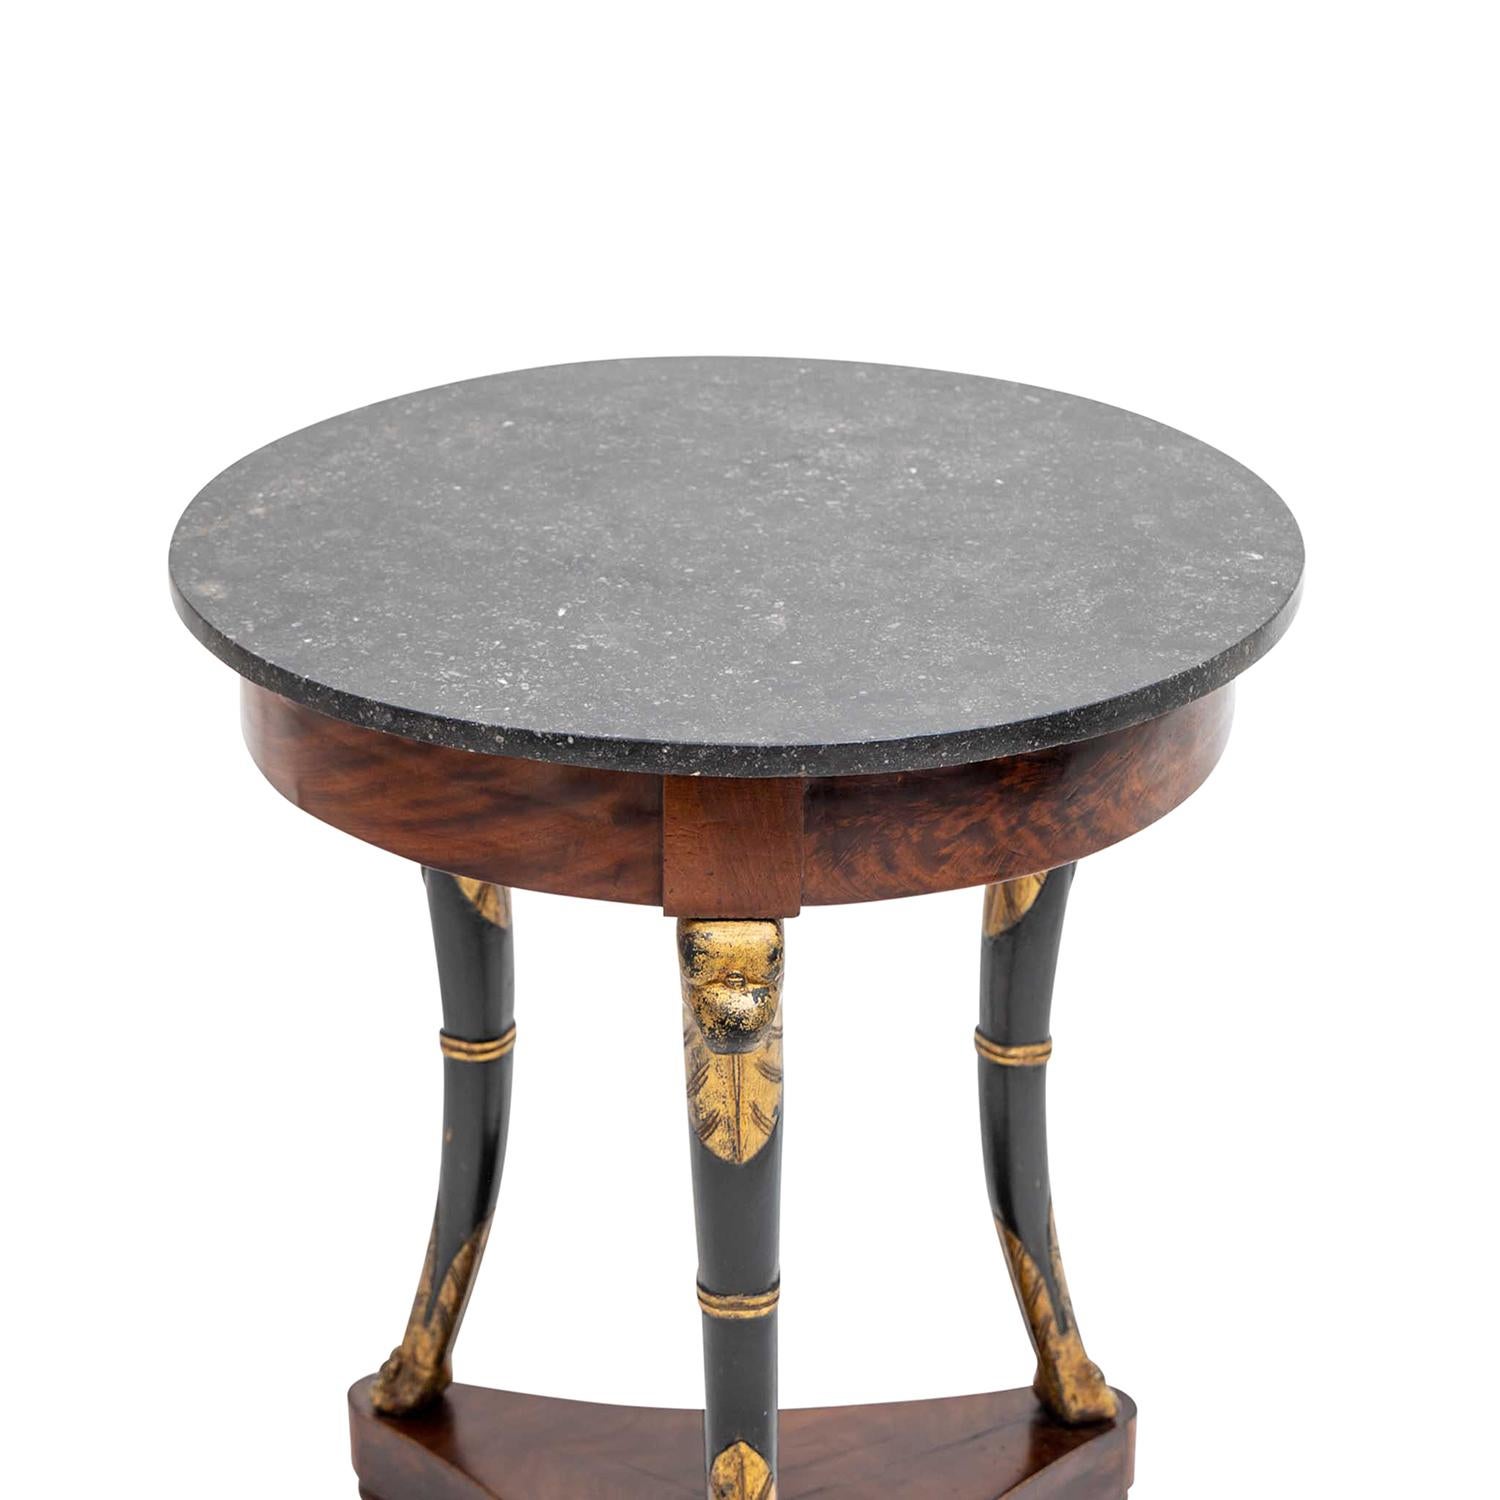 19th Century French Empire Round Mahogany Side Table - Antique Marble Table For Sale 1